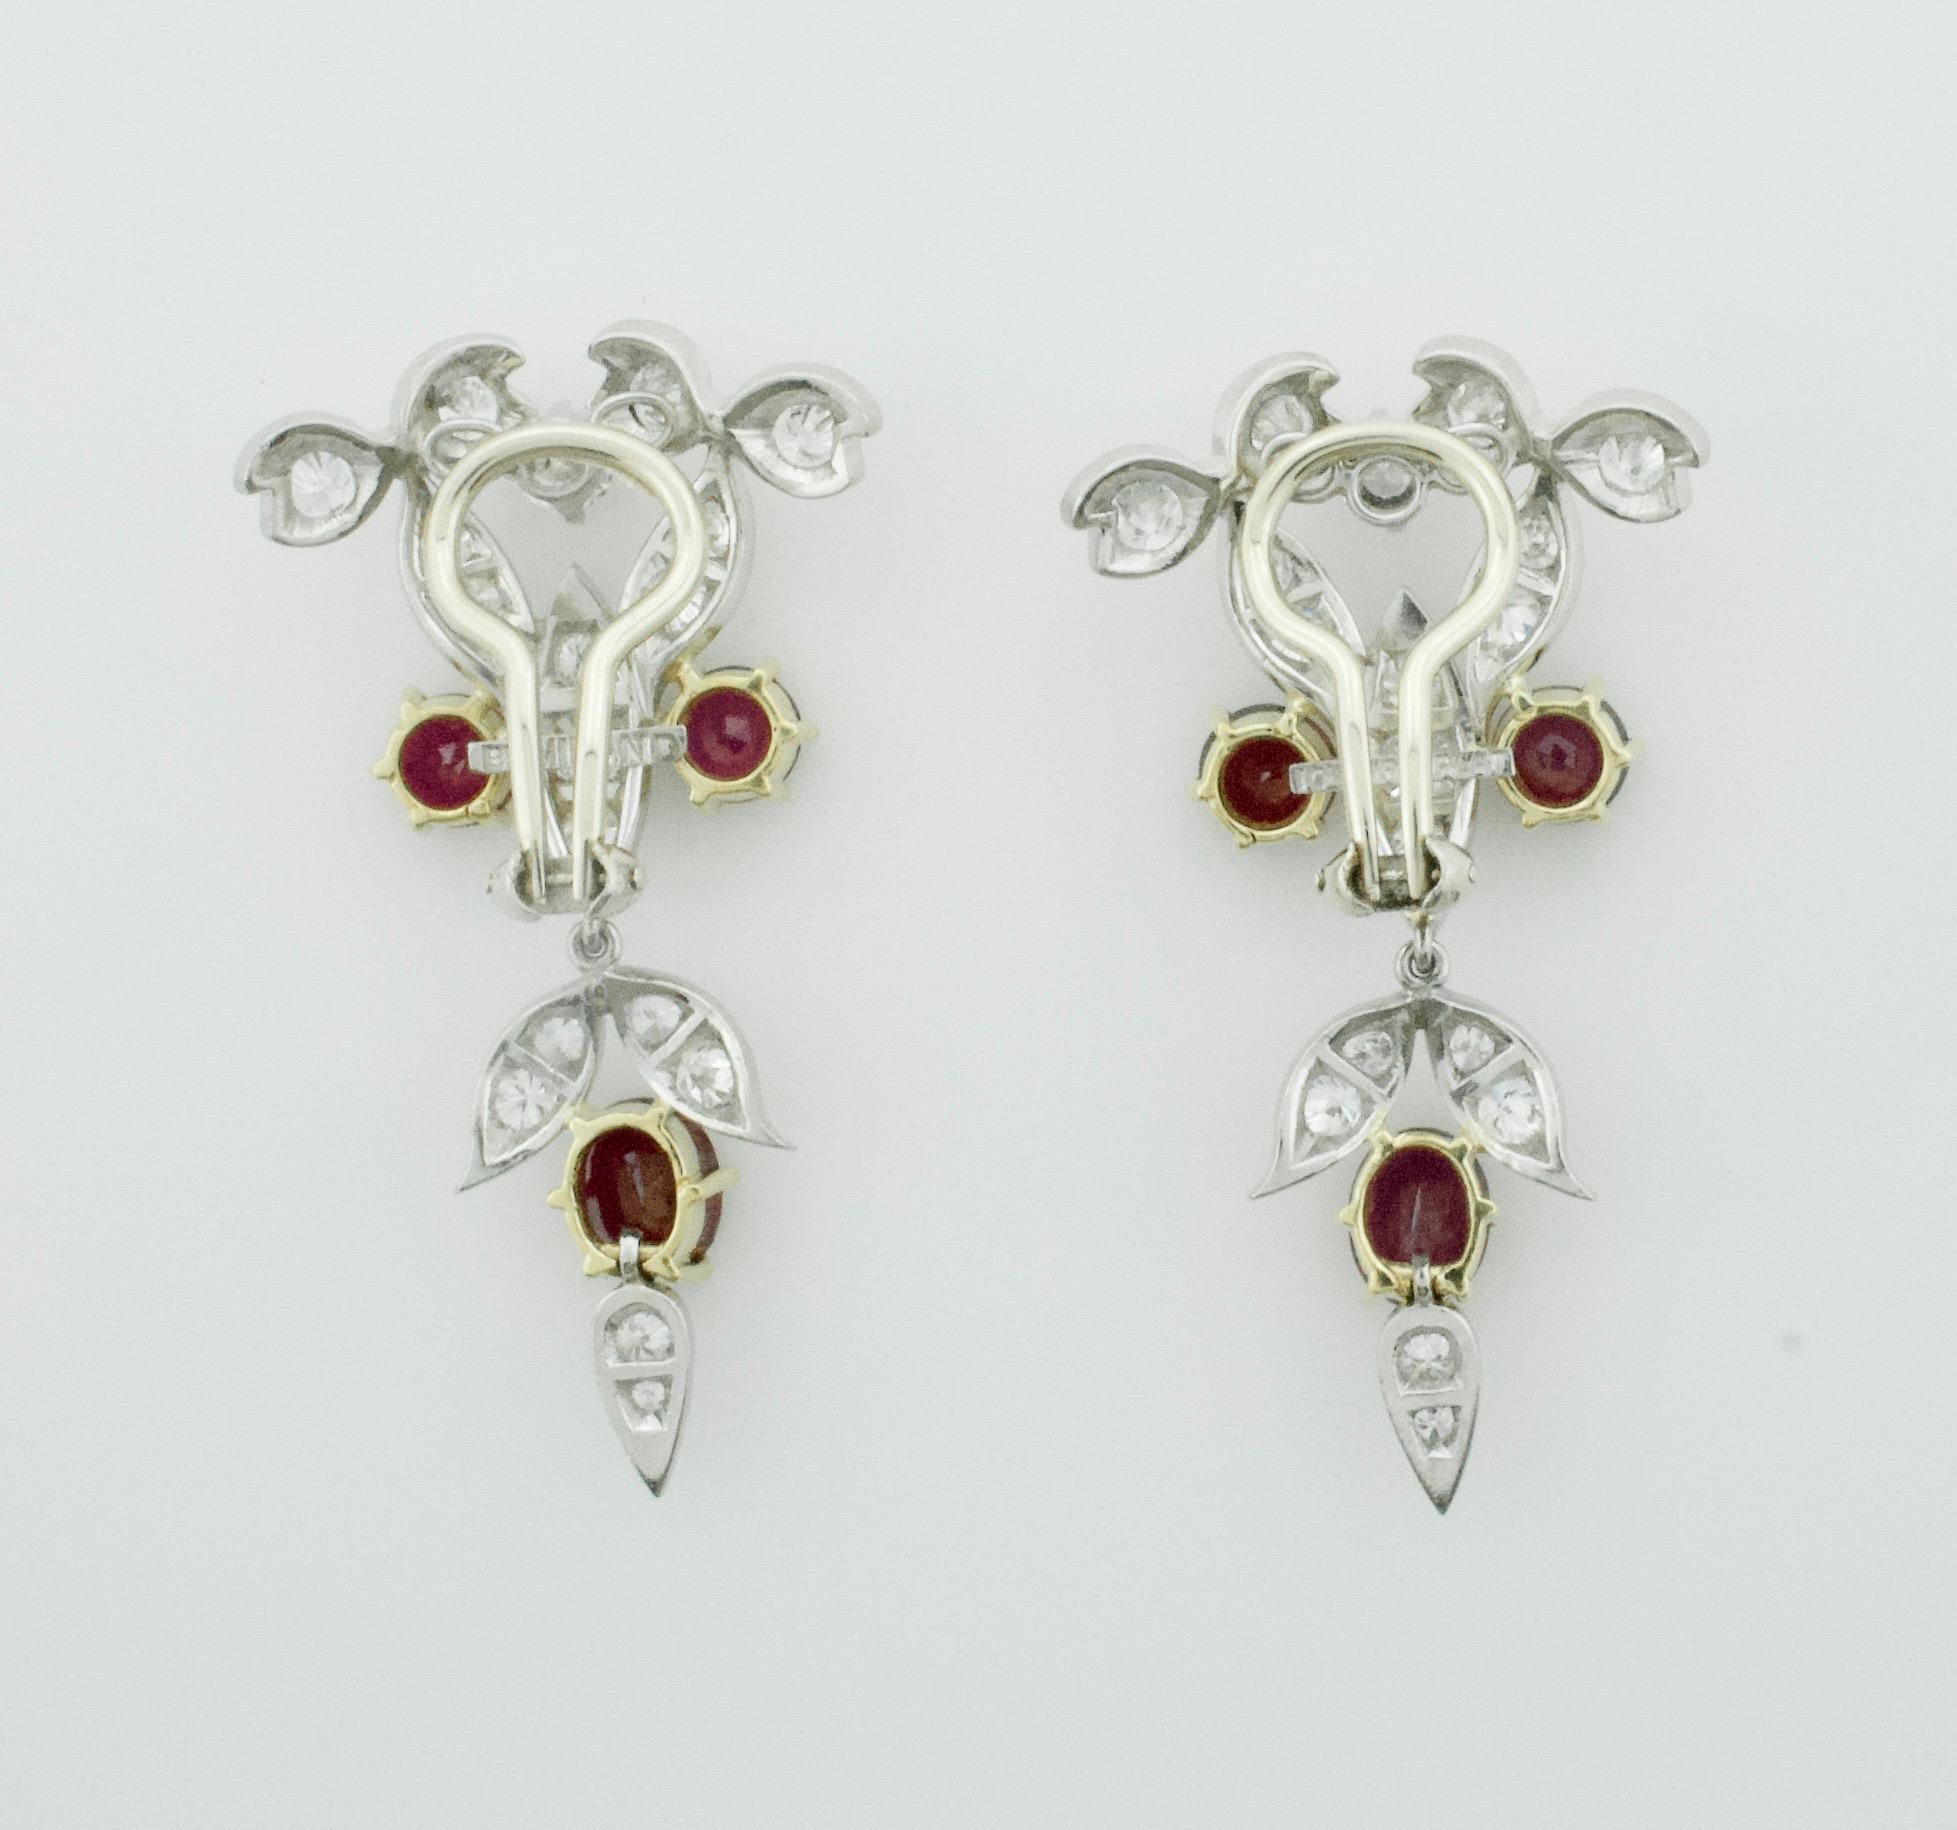 Oval Cut Dramatic Ruby and Diamond Dangling Earrings circa 1940s in Platinum and 18 Karat